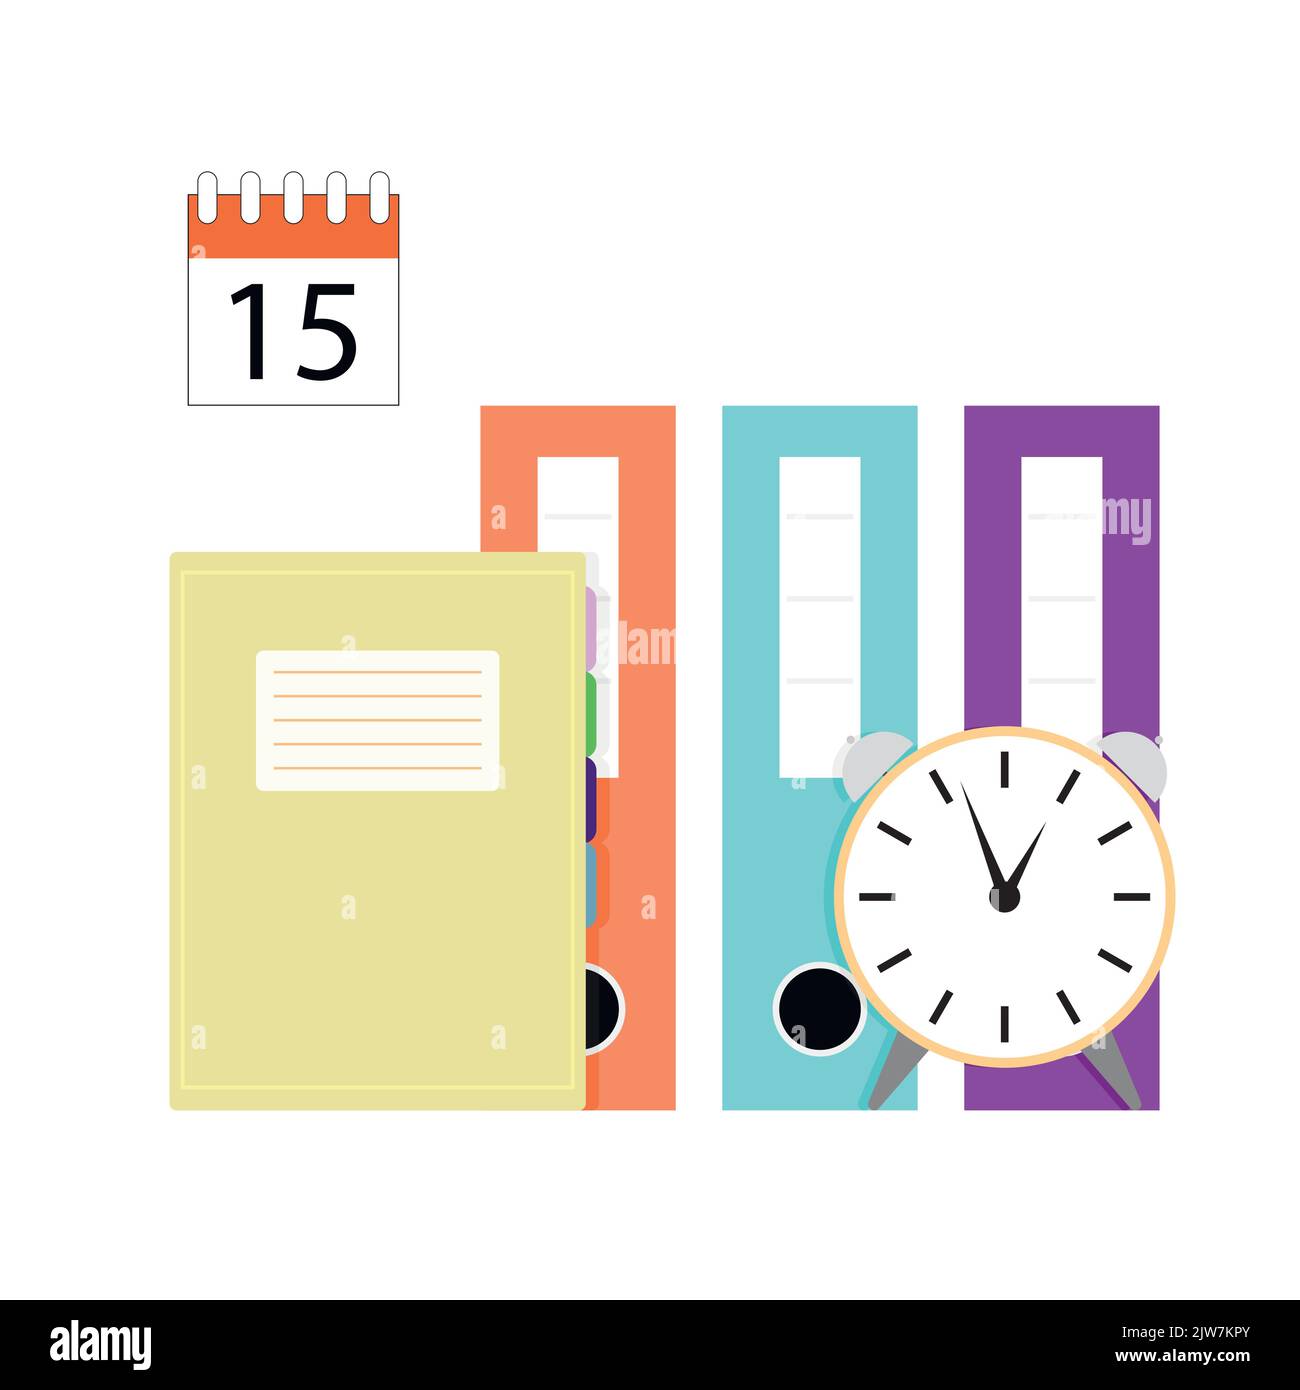 Organization of time and schedule concept, business management process. Vector illustration. Office team plan, Template optimization, professional mee Stock Vector